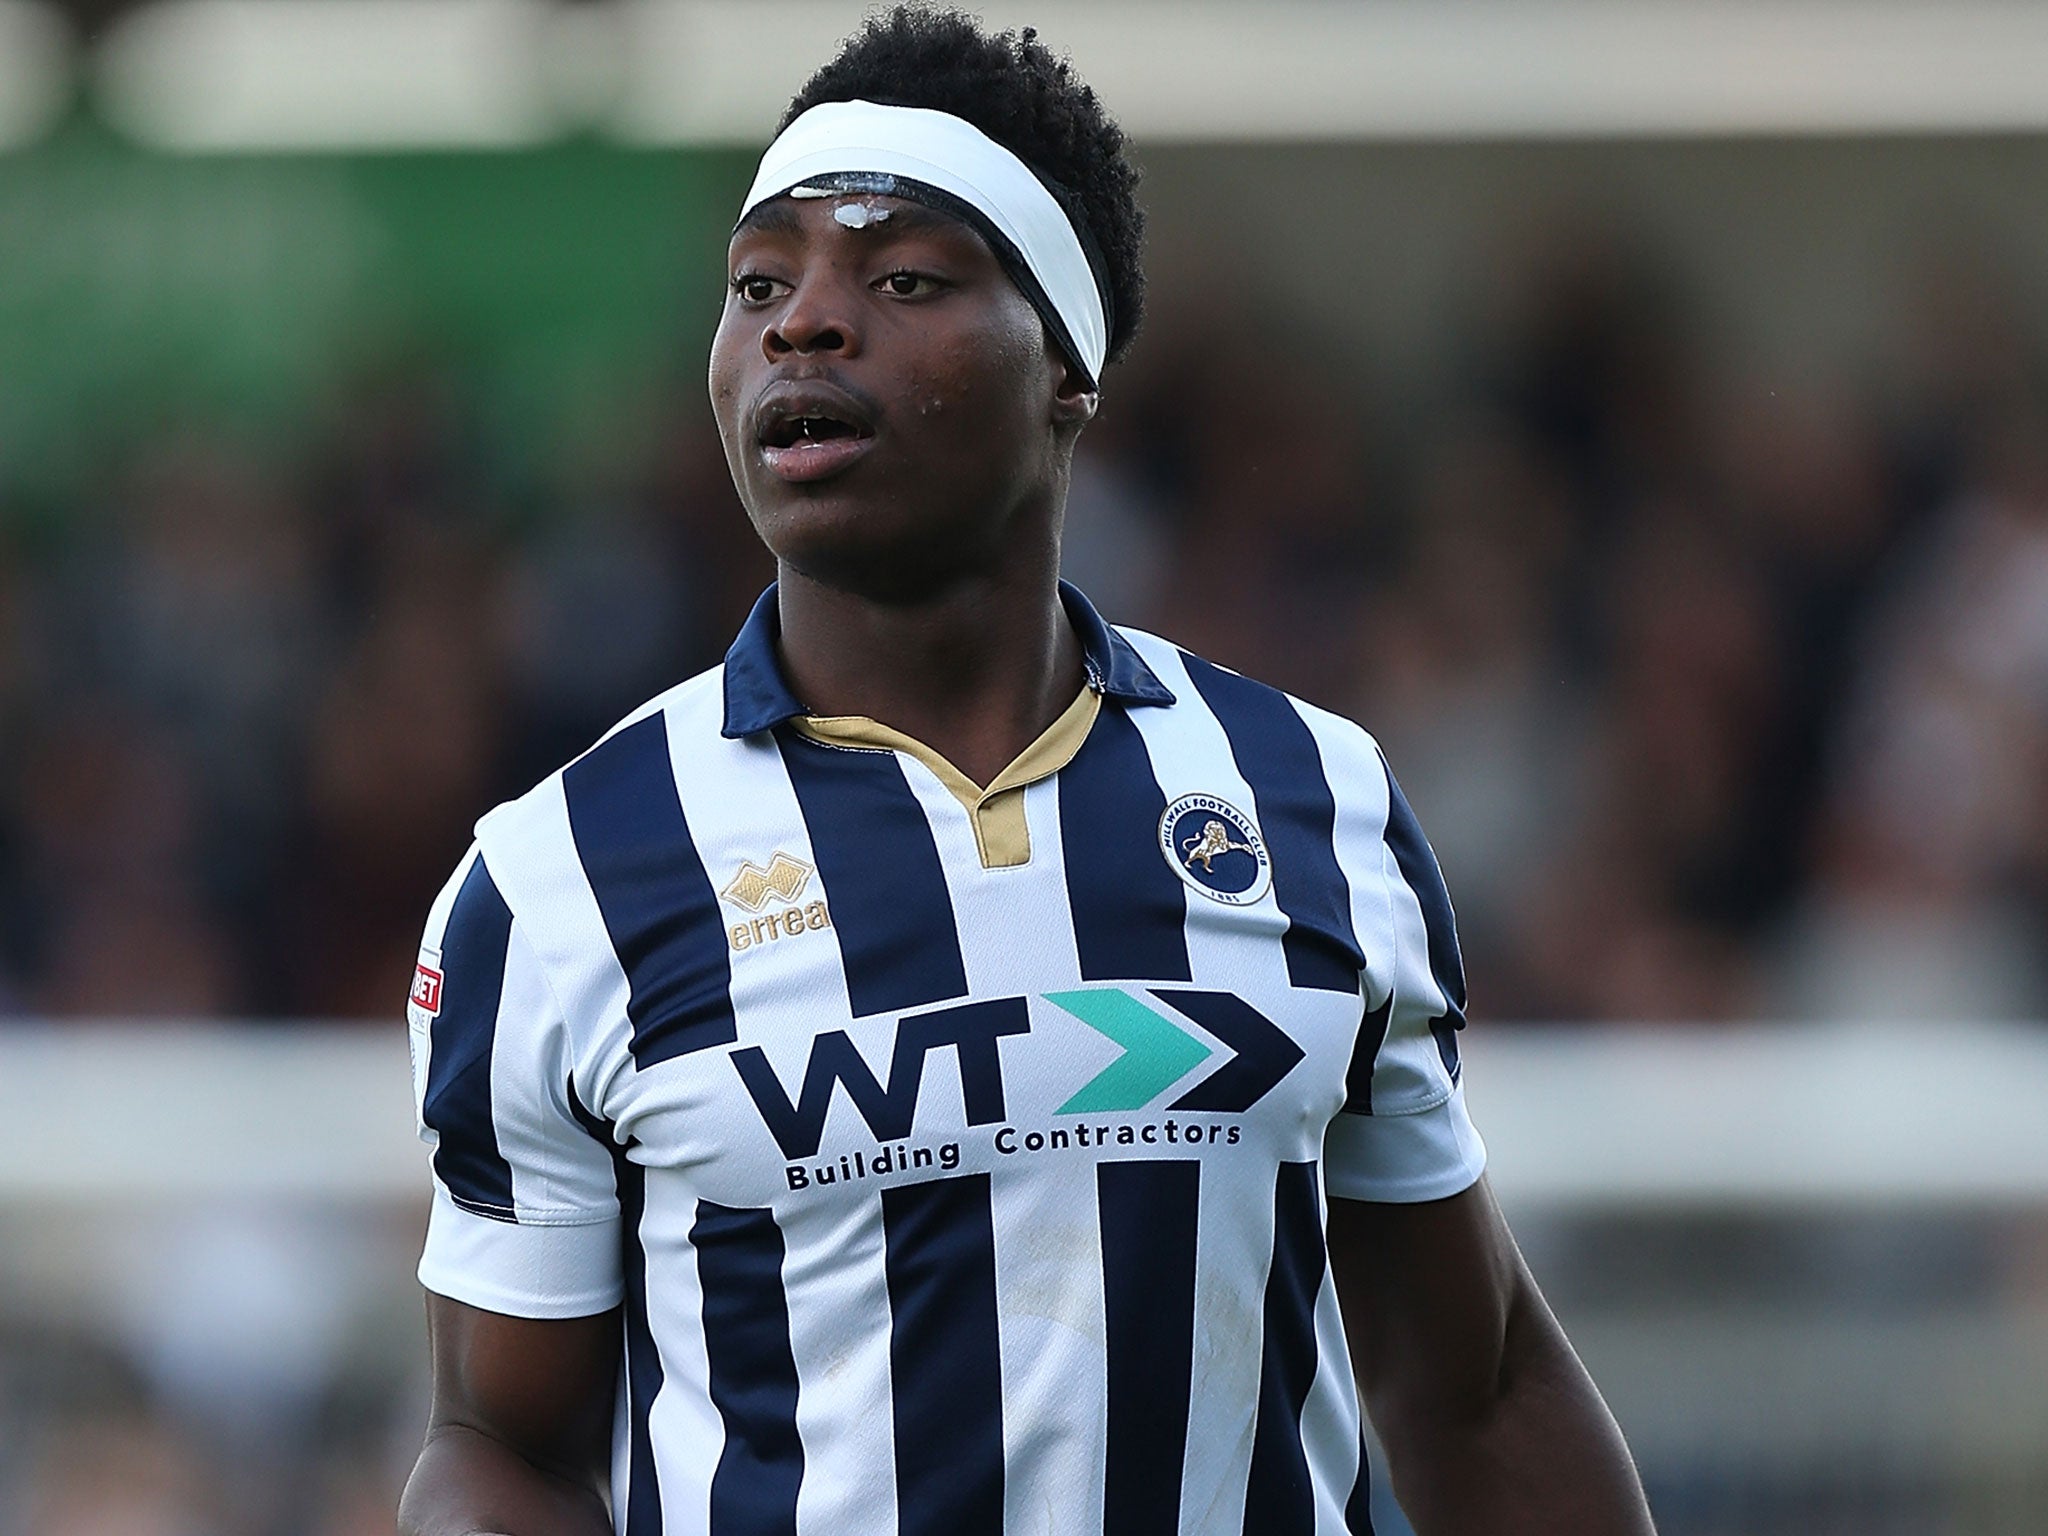 Local boy Fred Onyedinma is one of many who represent the surrounding area of Millwall